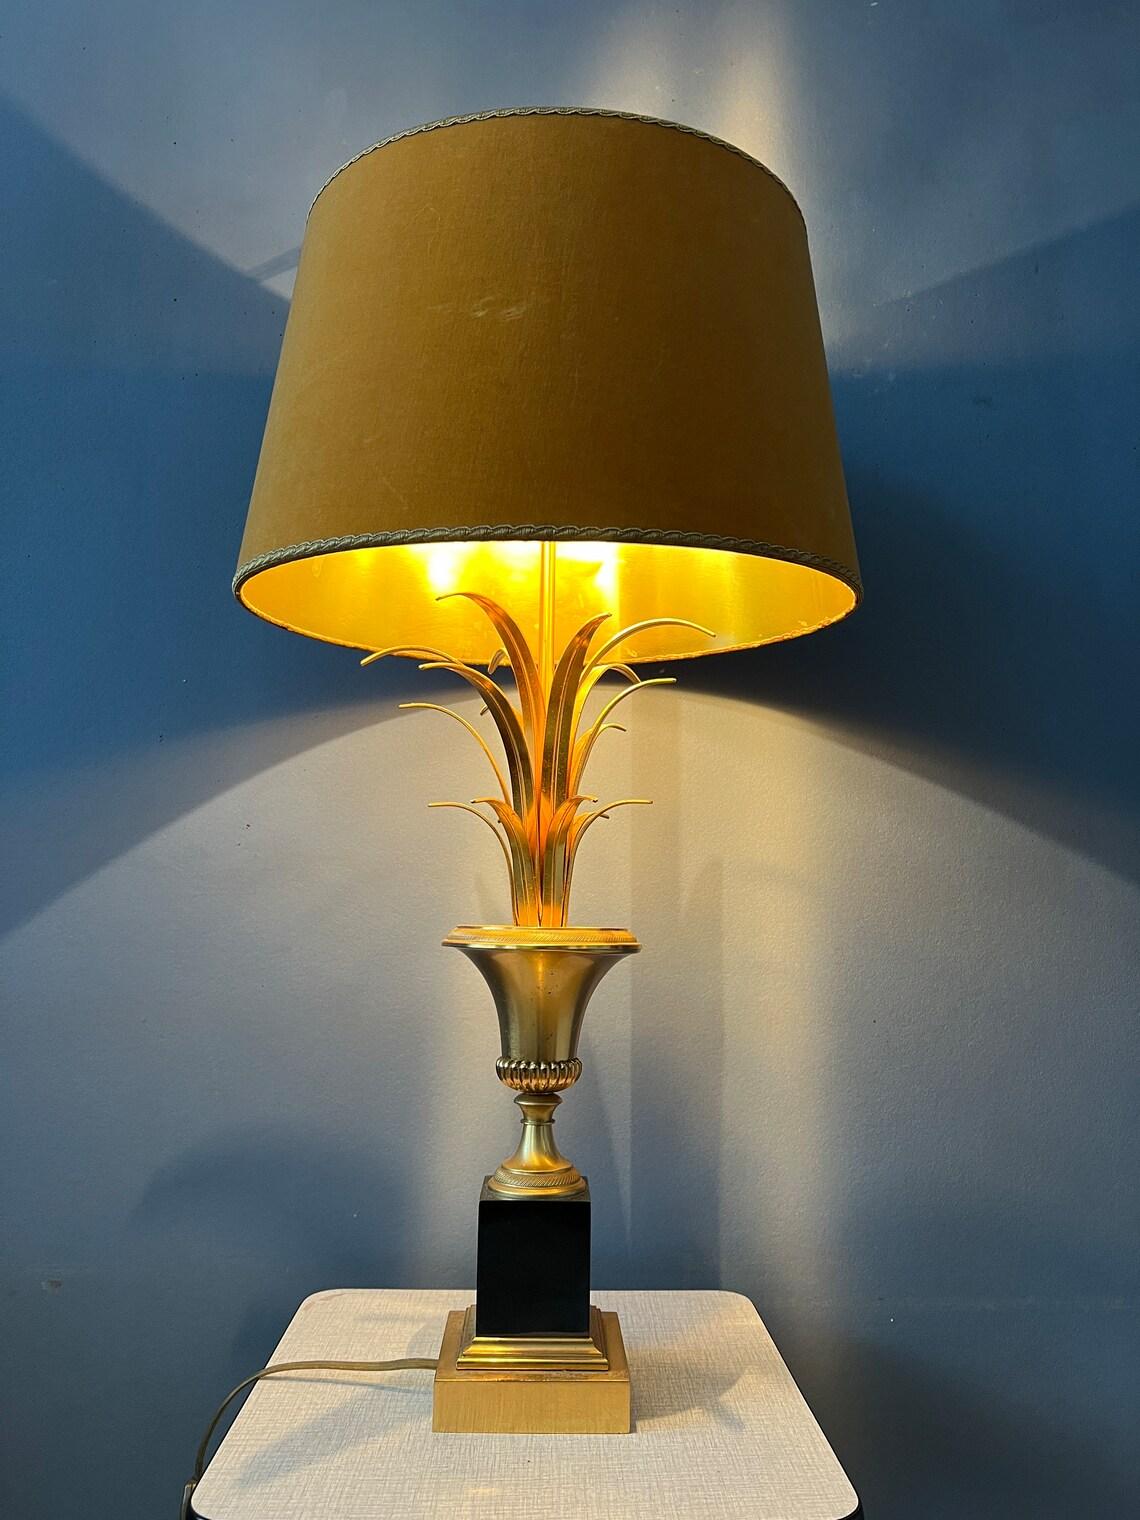 Hollywood regency table lamp with golden base. The lamp requires one E27/26 lightbulb and currently has an EU-plug (usable outside EU with plug-converter).

Additional information:
Materials: Cotton, metal
Period: 1970s
Dimensions:Diameter Shade: 32